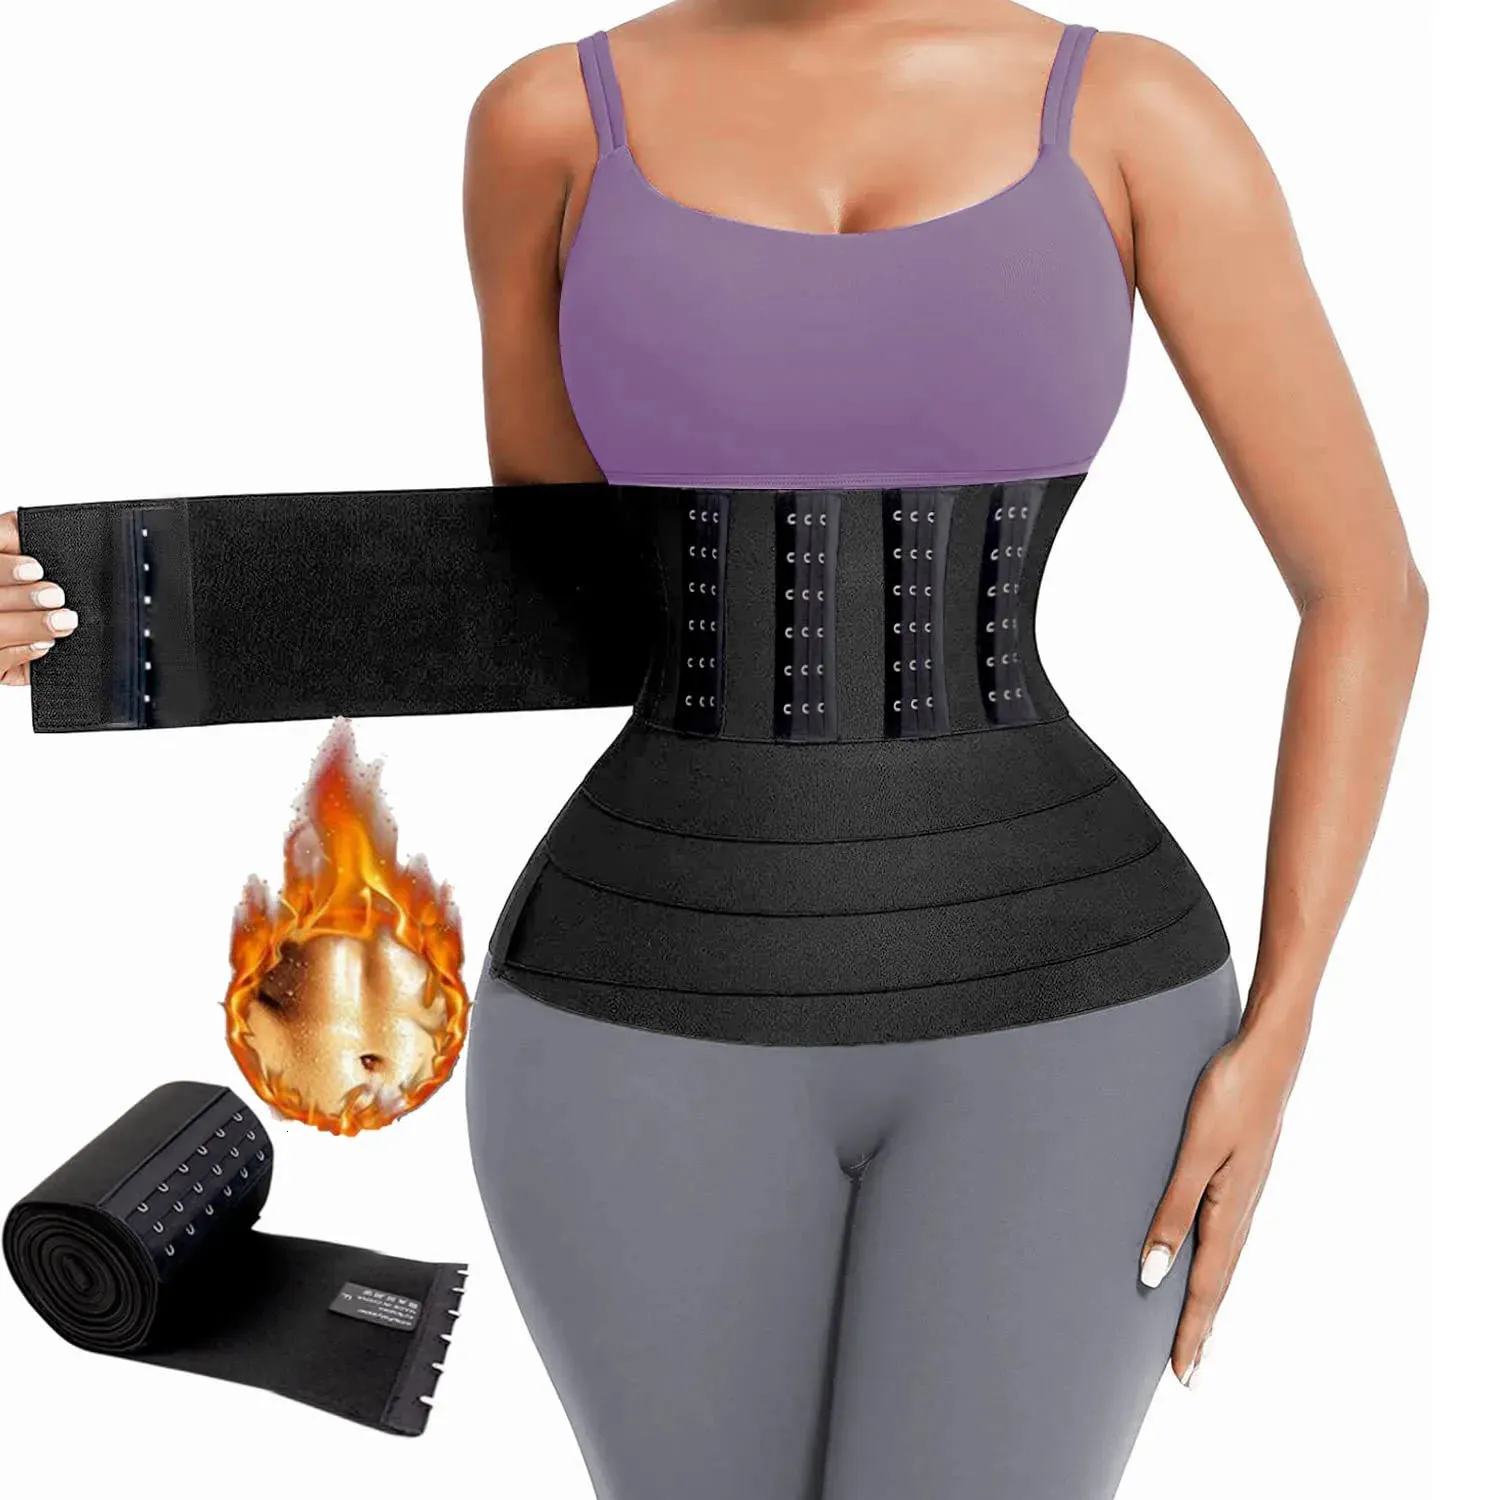 Taille Trainer Belt For Women Taille Bandage Wraps Tummy Sweat Wrap Plus Size Belly Body Shaper Workout Tailout Trimmer Belt Daily 240418